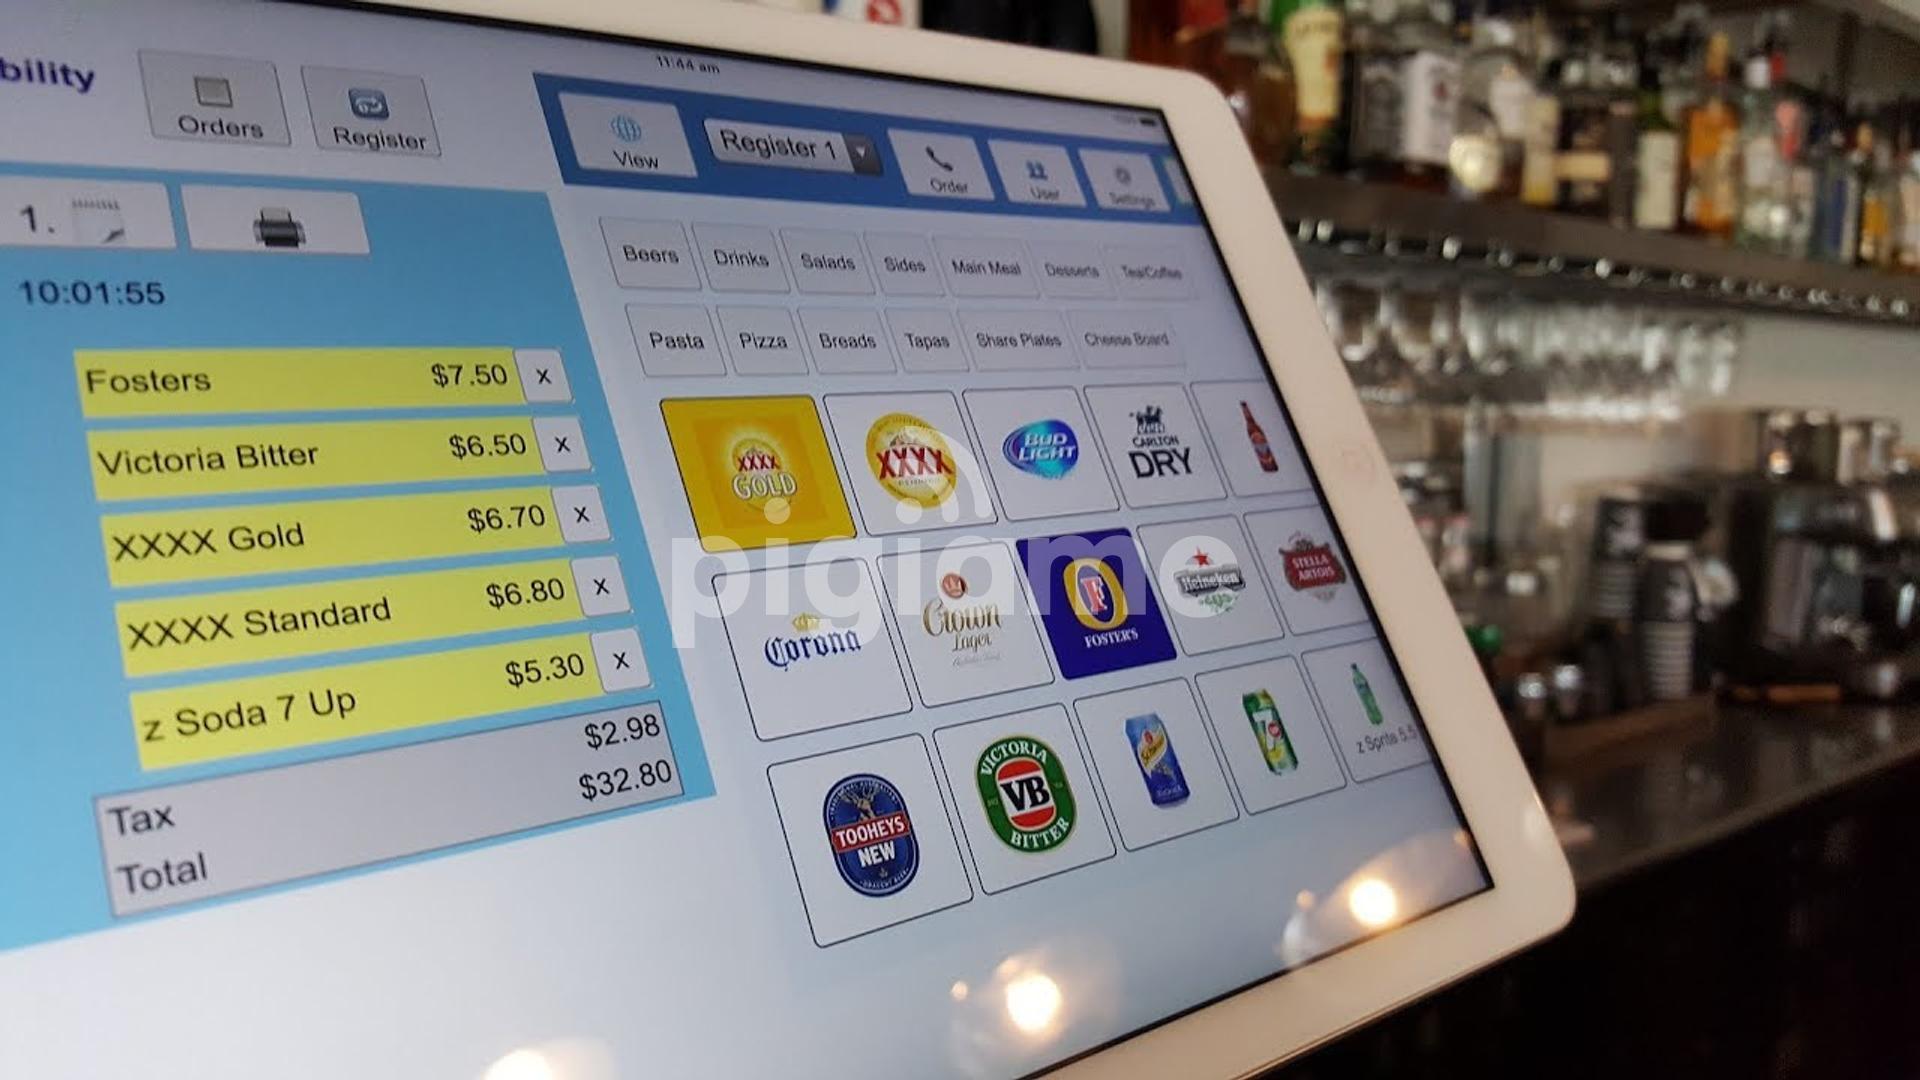 Restaurant Bar Club Hotel Pos Point Of Sale Software (Software With Mpesa).  in Nairobi CBD, Luthuli Avenue | PigiaMe